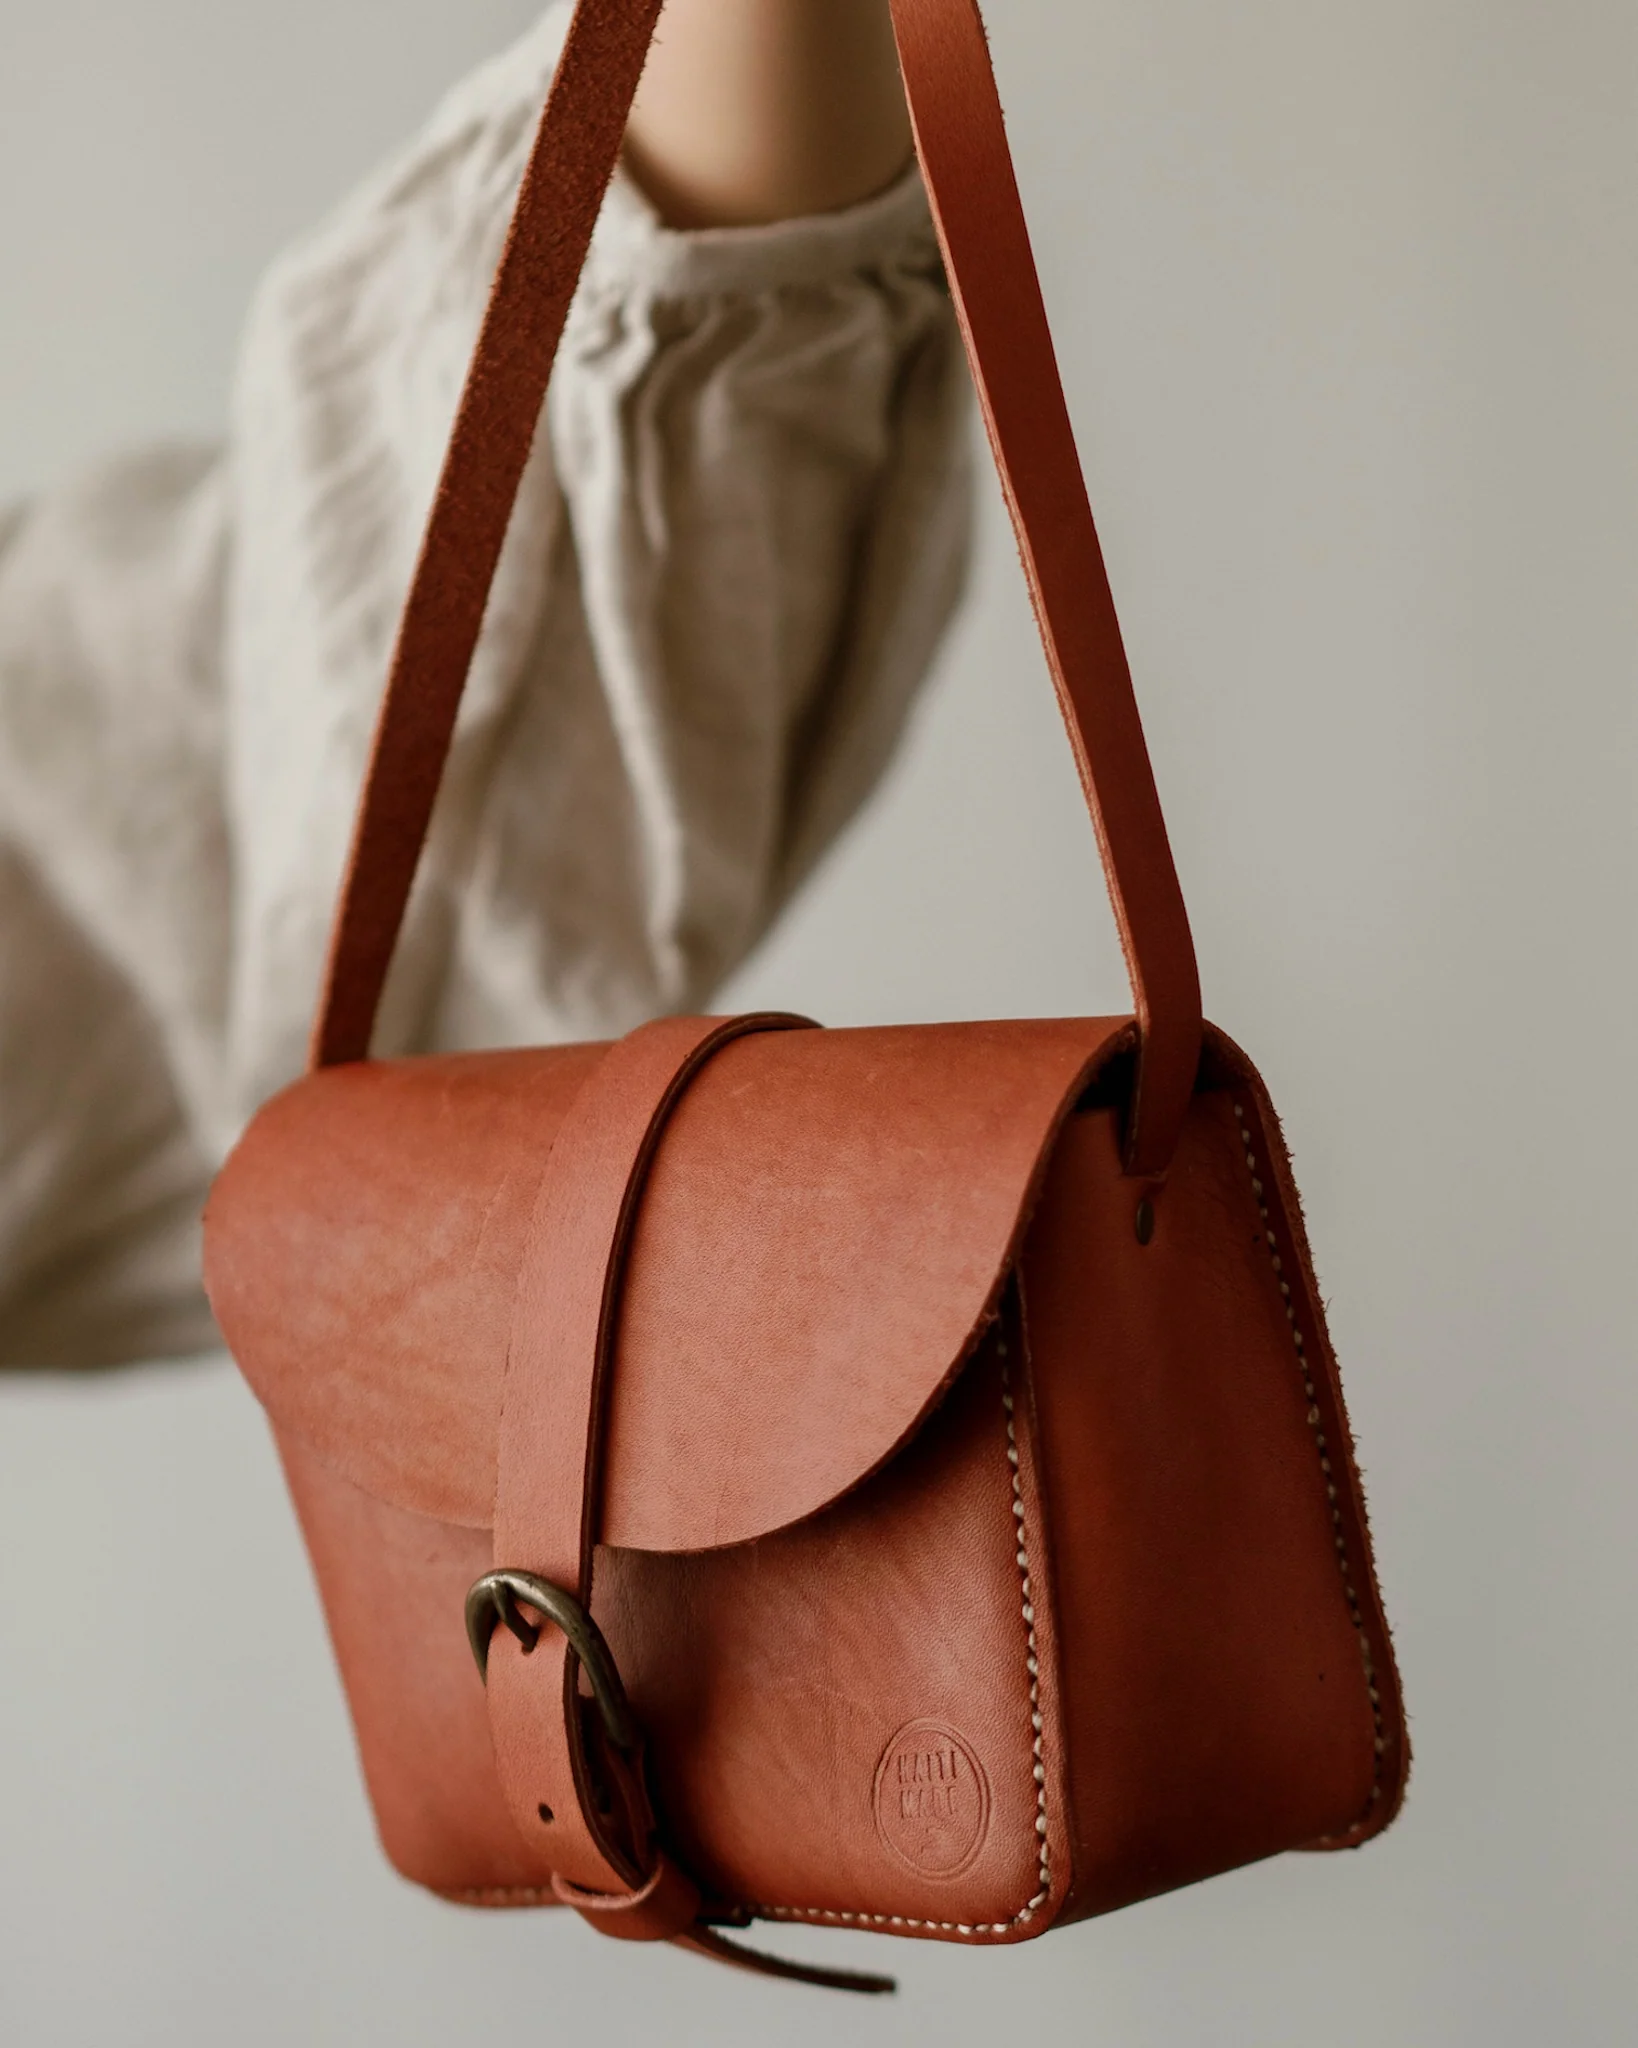 Crossbody bag made with leather